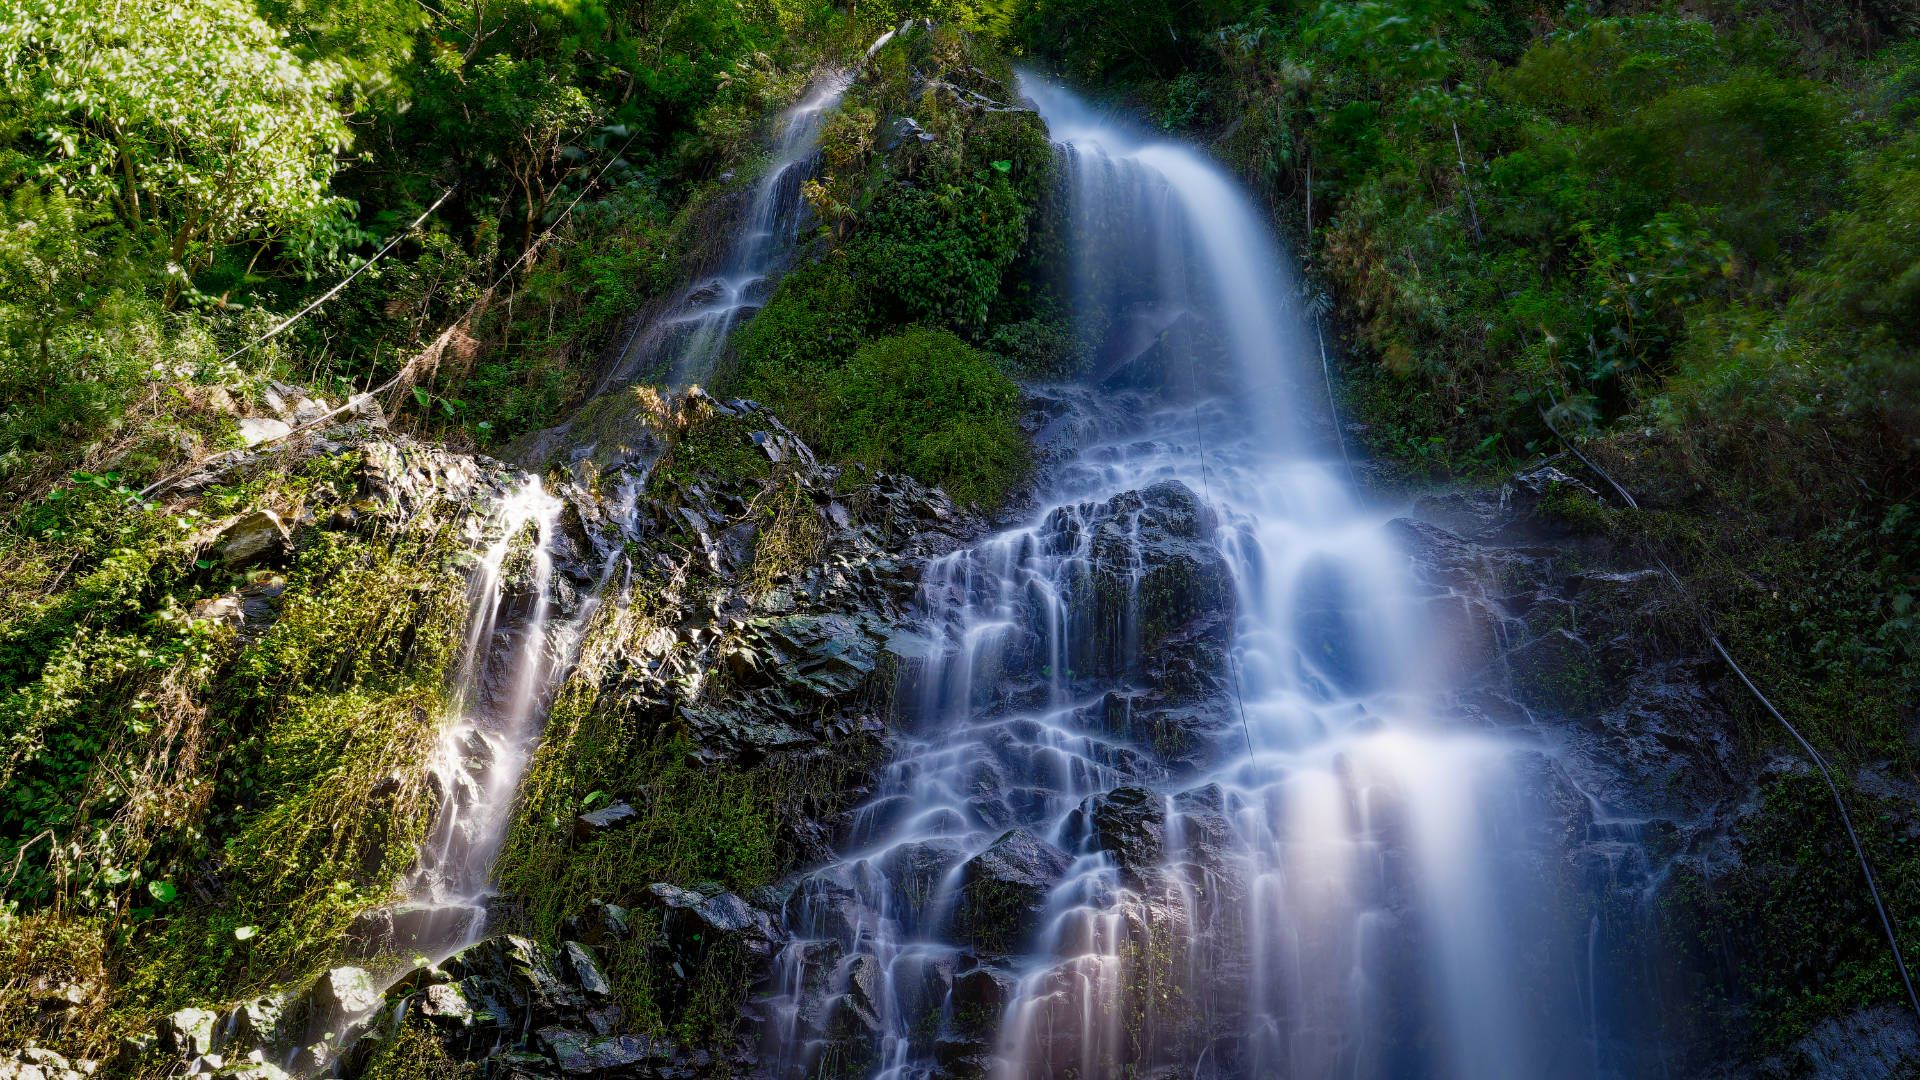 A tall and wispy waterfall cascading down rocks, with dense vegetation either side.